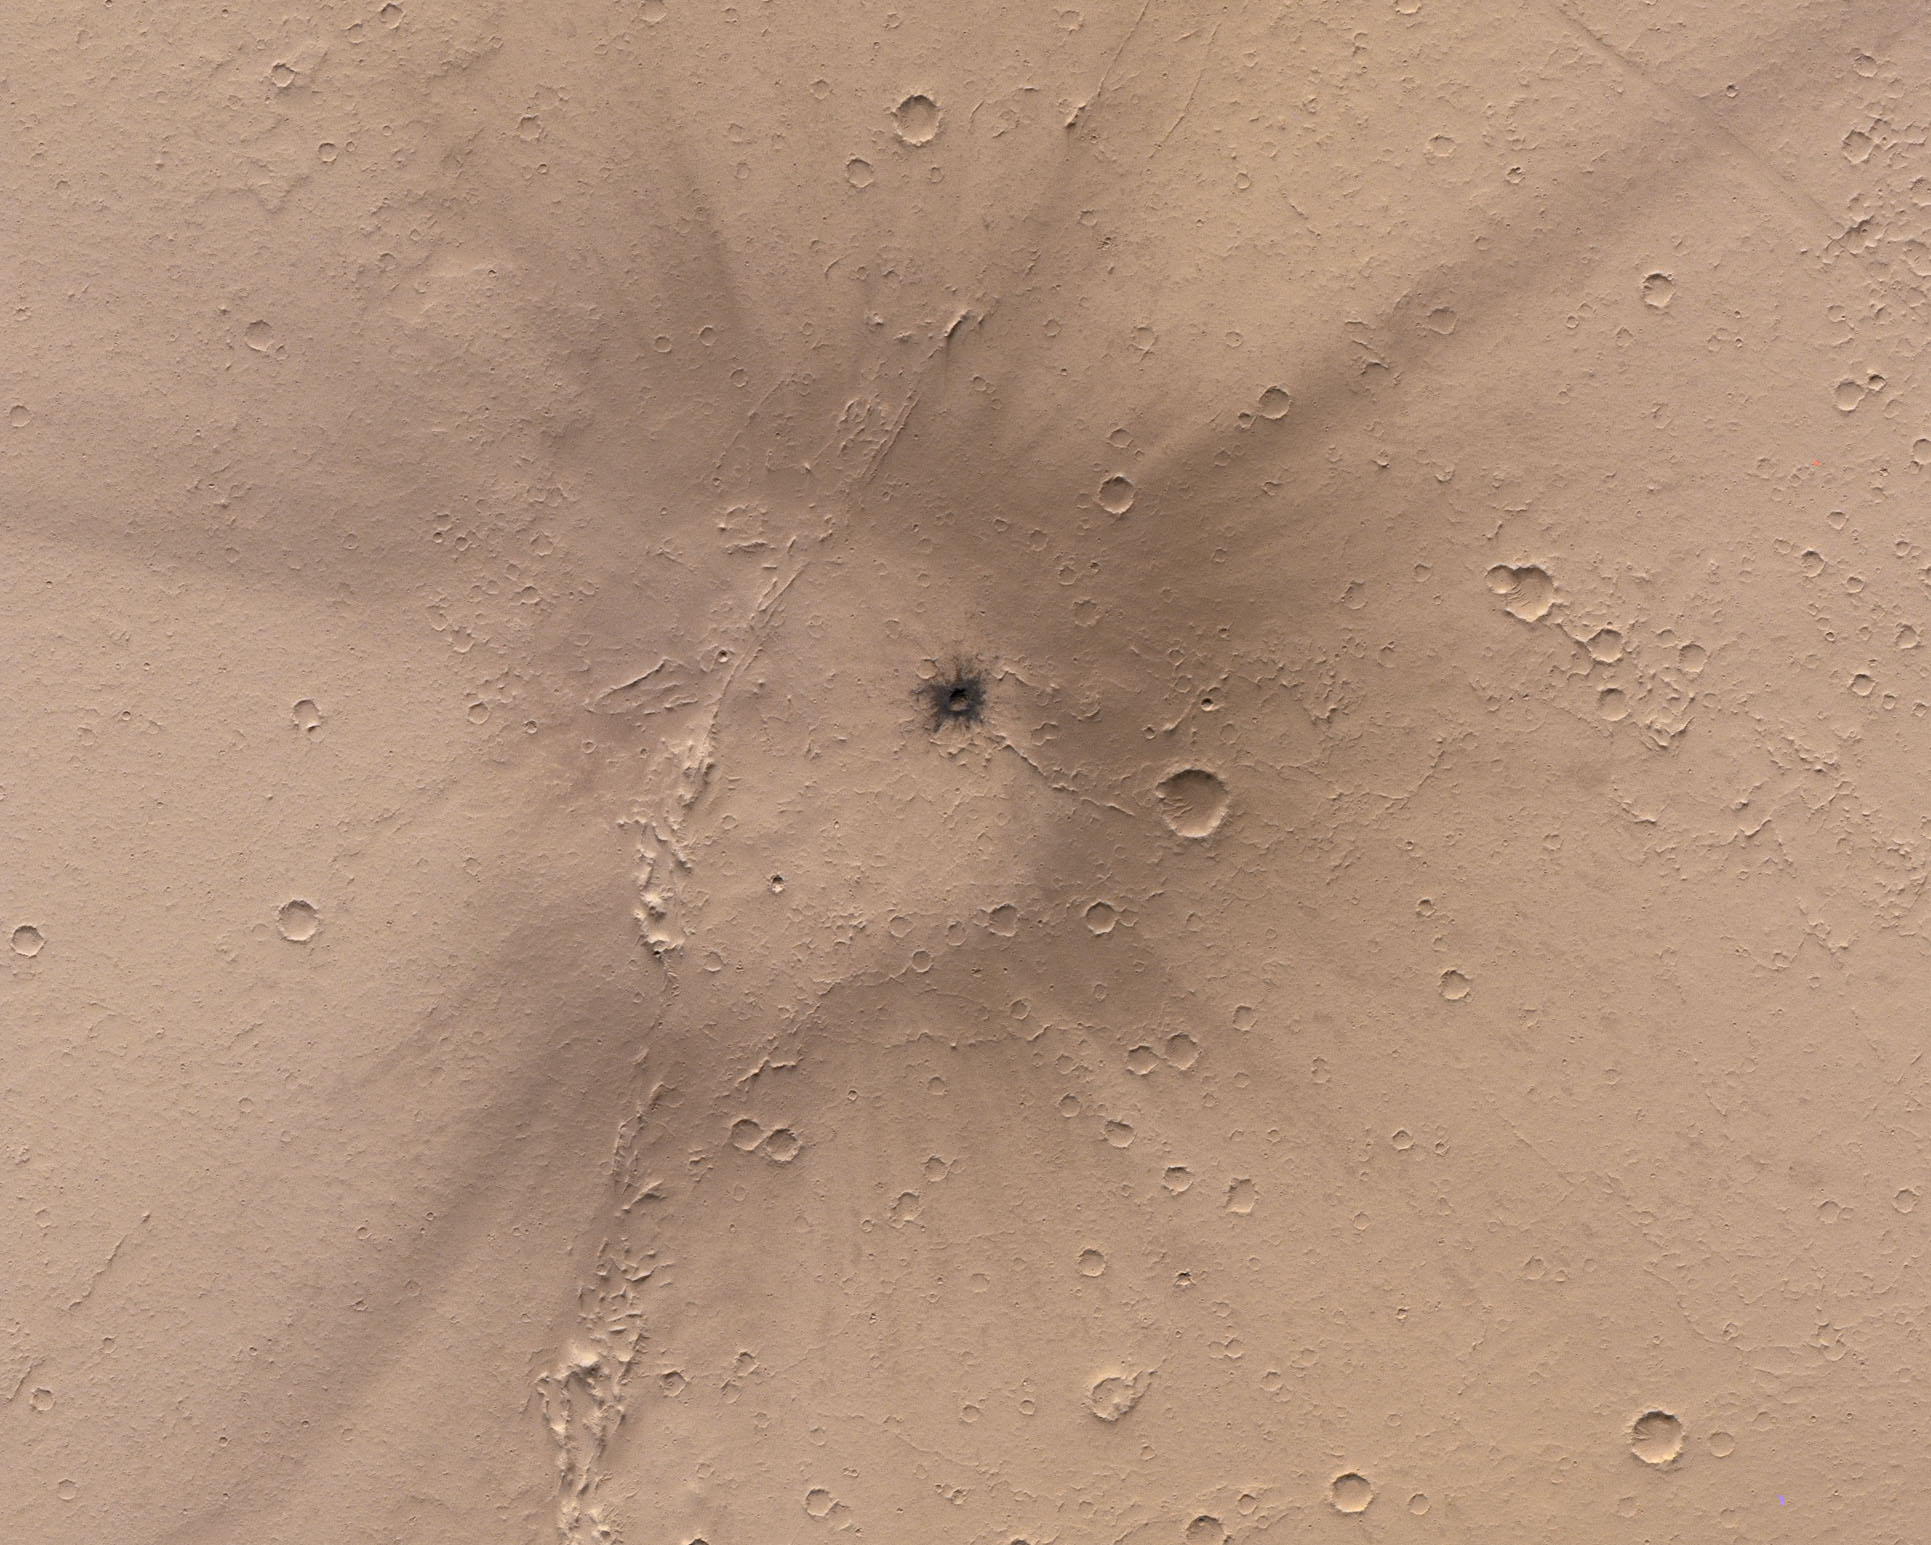 A fresh looking impact site in Mars' Tharsis region. A small region of dark material is surrounded by a larger halo and rays of dark material.